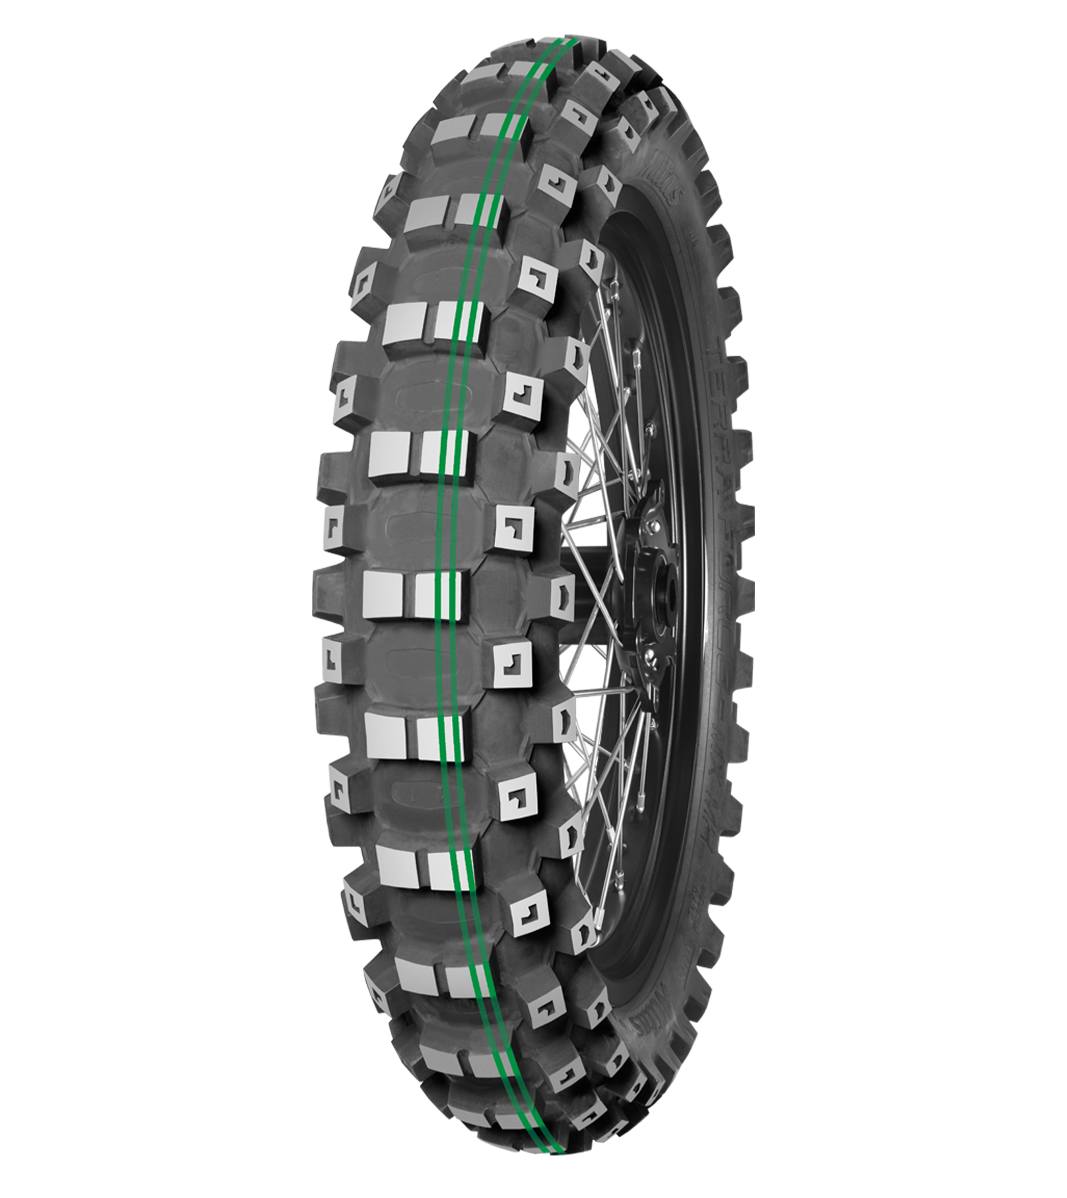 Mitas TERRA FORCE-MX MH 90/100-16 Enduro Competition Off-Road SUPER SOFT EXTREME 51M 2 Green Tube Rear Tire, 226085, 90/100-16, Enduro Competition, Off-Road, Rear, Terra Force, Terra Force-MX MH, Trail, Tires - Imported and distributed in North &amp; South America by Lindeco Genuine Powersports - Premier Powersports Equipment and Accessories for Motorcycle Enthusiasts, Professional Riders and Dealers.